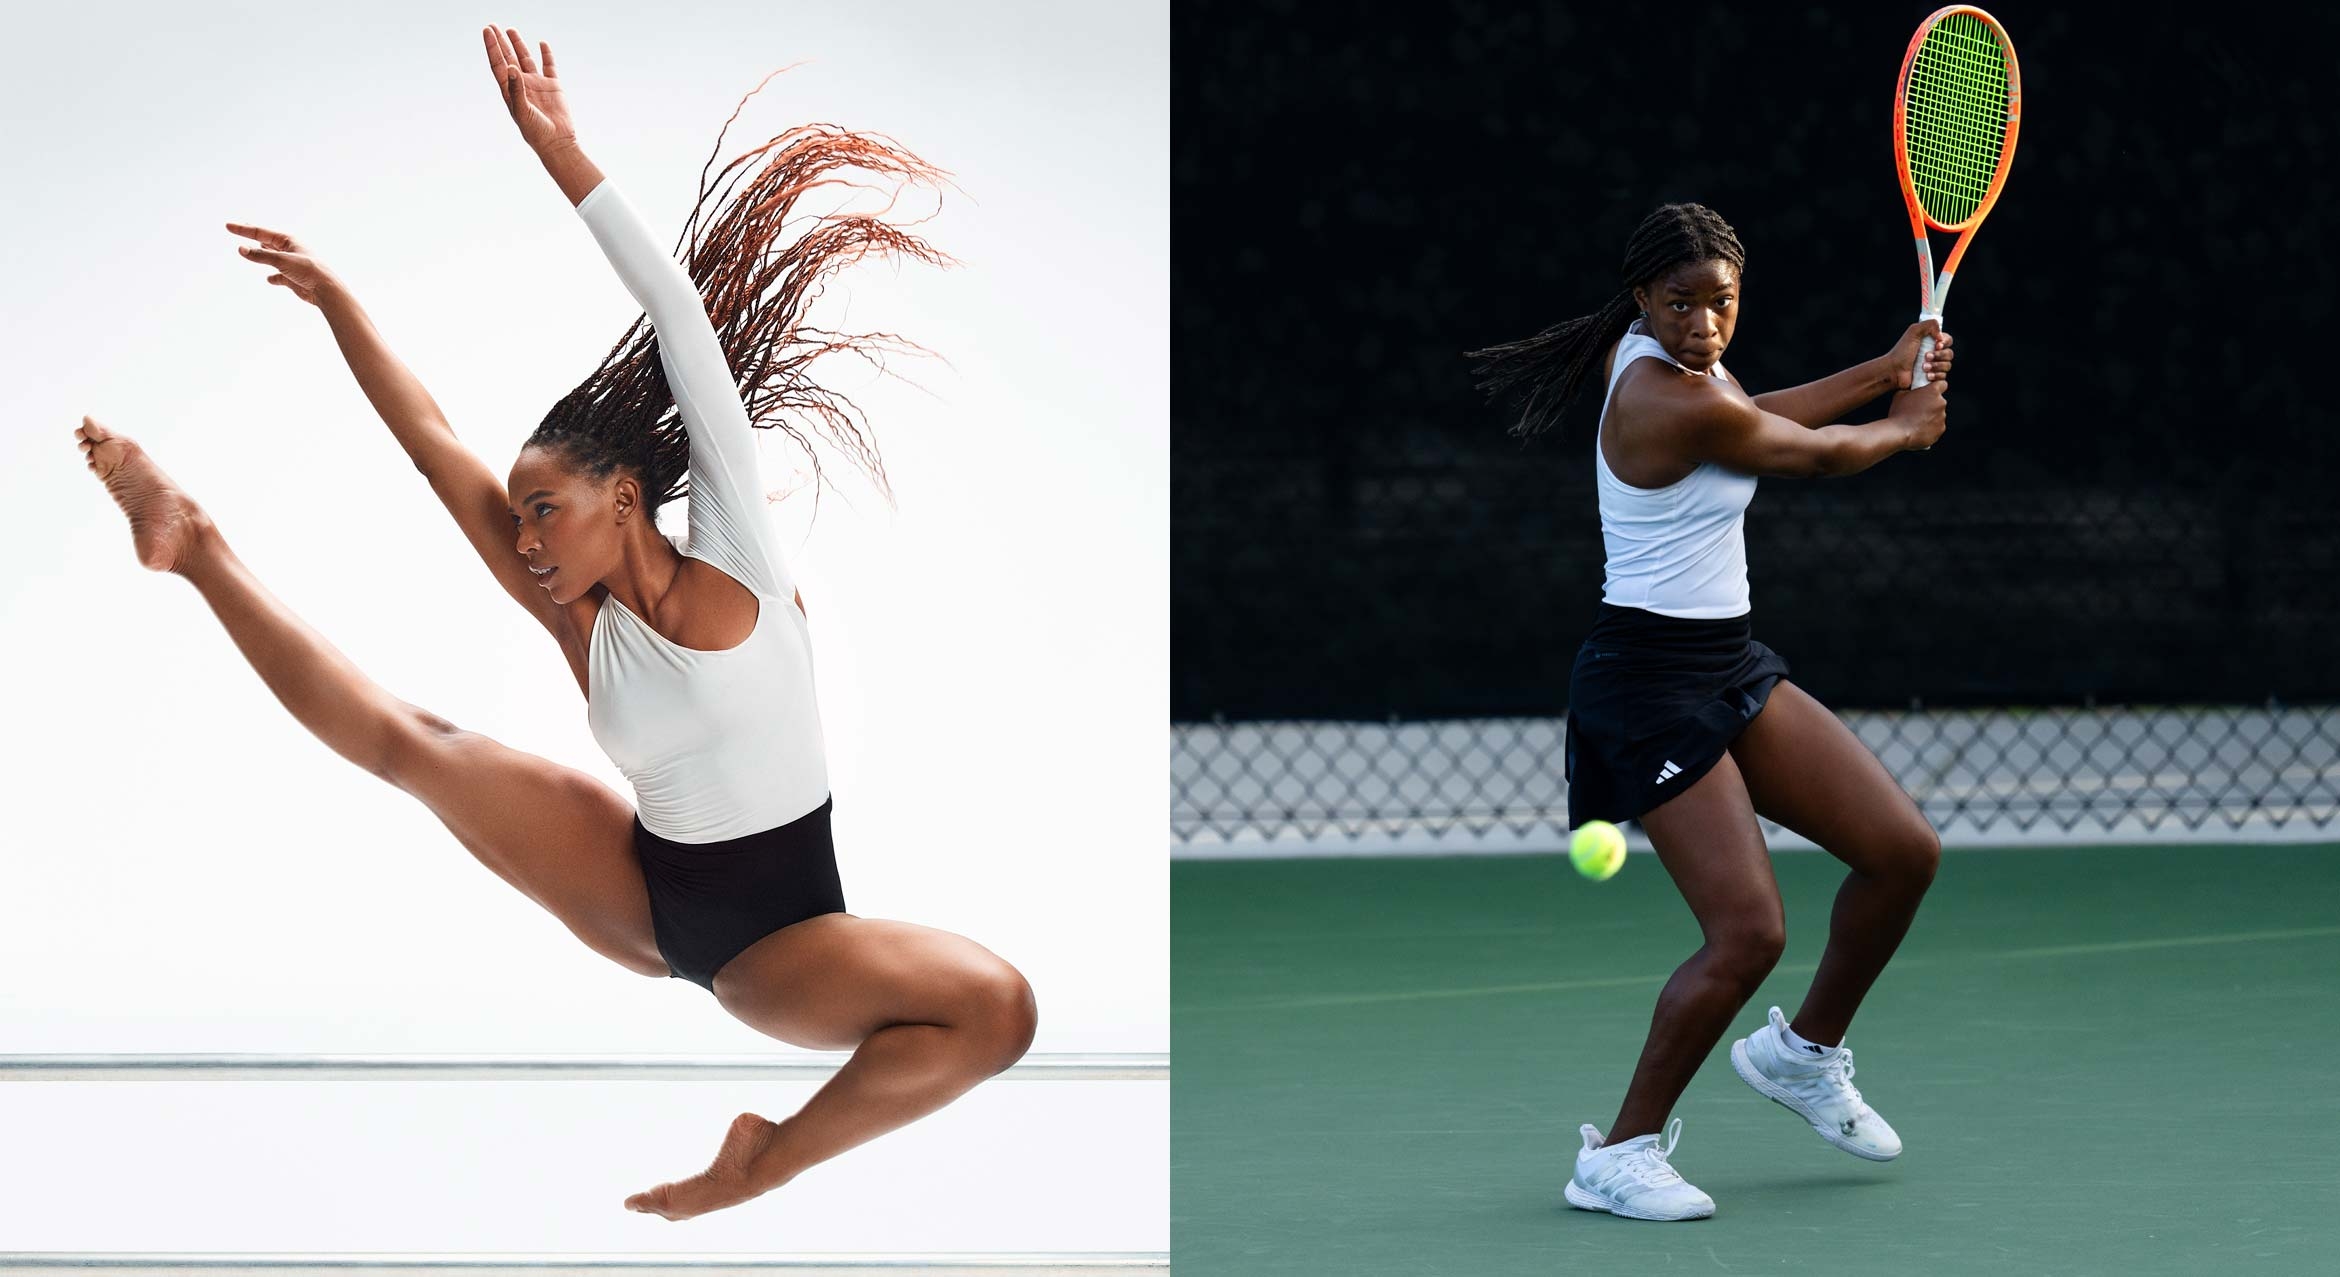 A side-by-side image of a female dancer in motion and a woman playing tennis